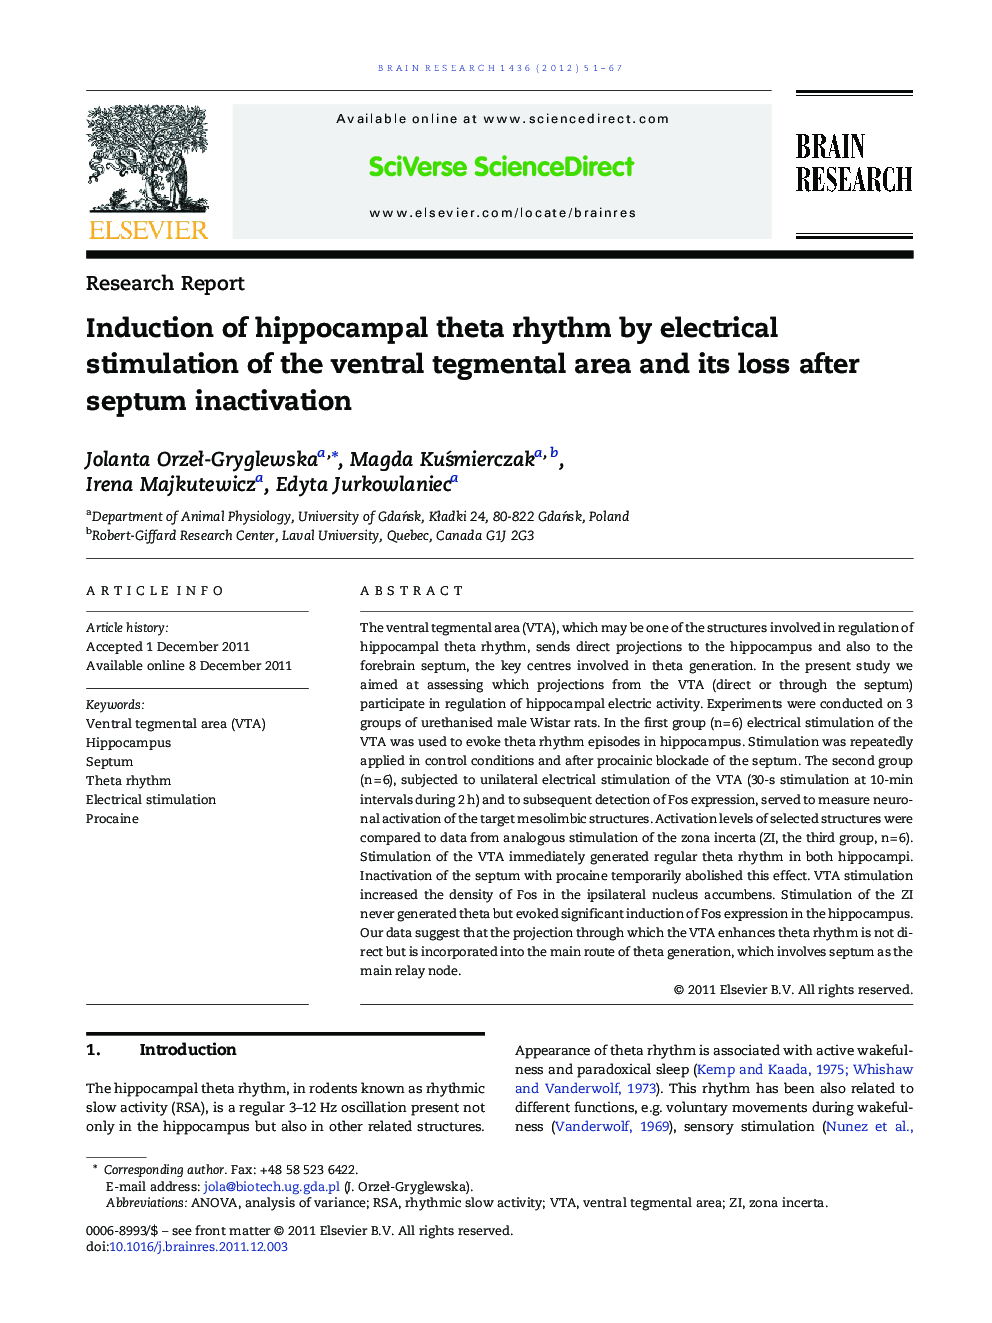 Research ReportInduction of hippocampal theta rhythm by electrical stimulation of the ventral tegmental area and its loss after septum inactivation